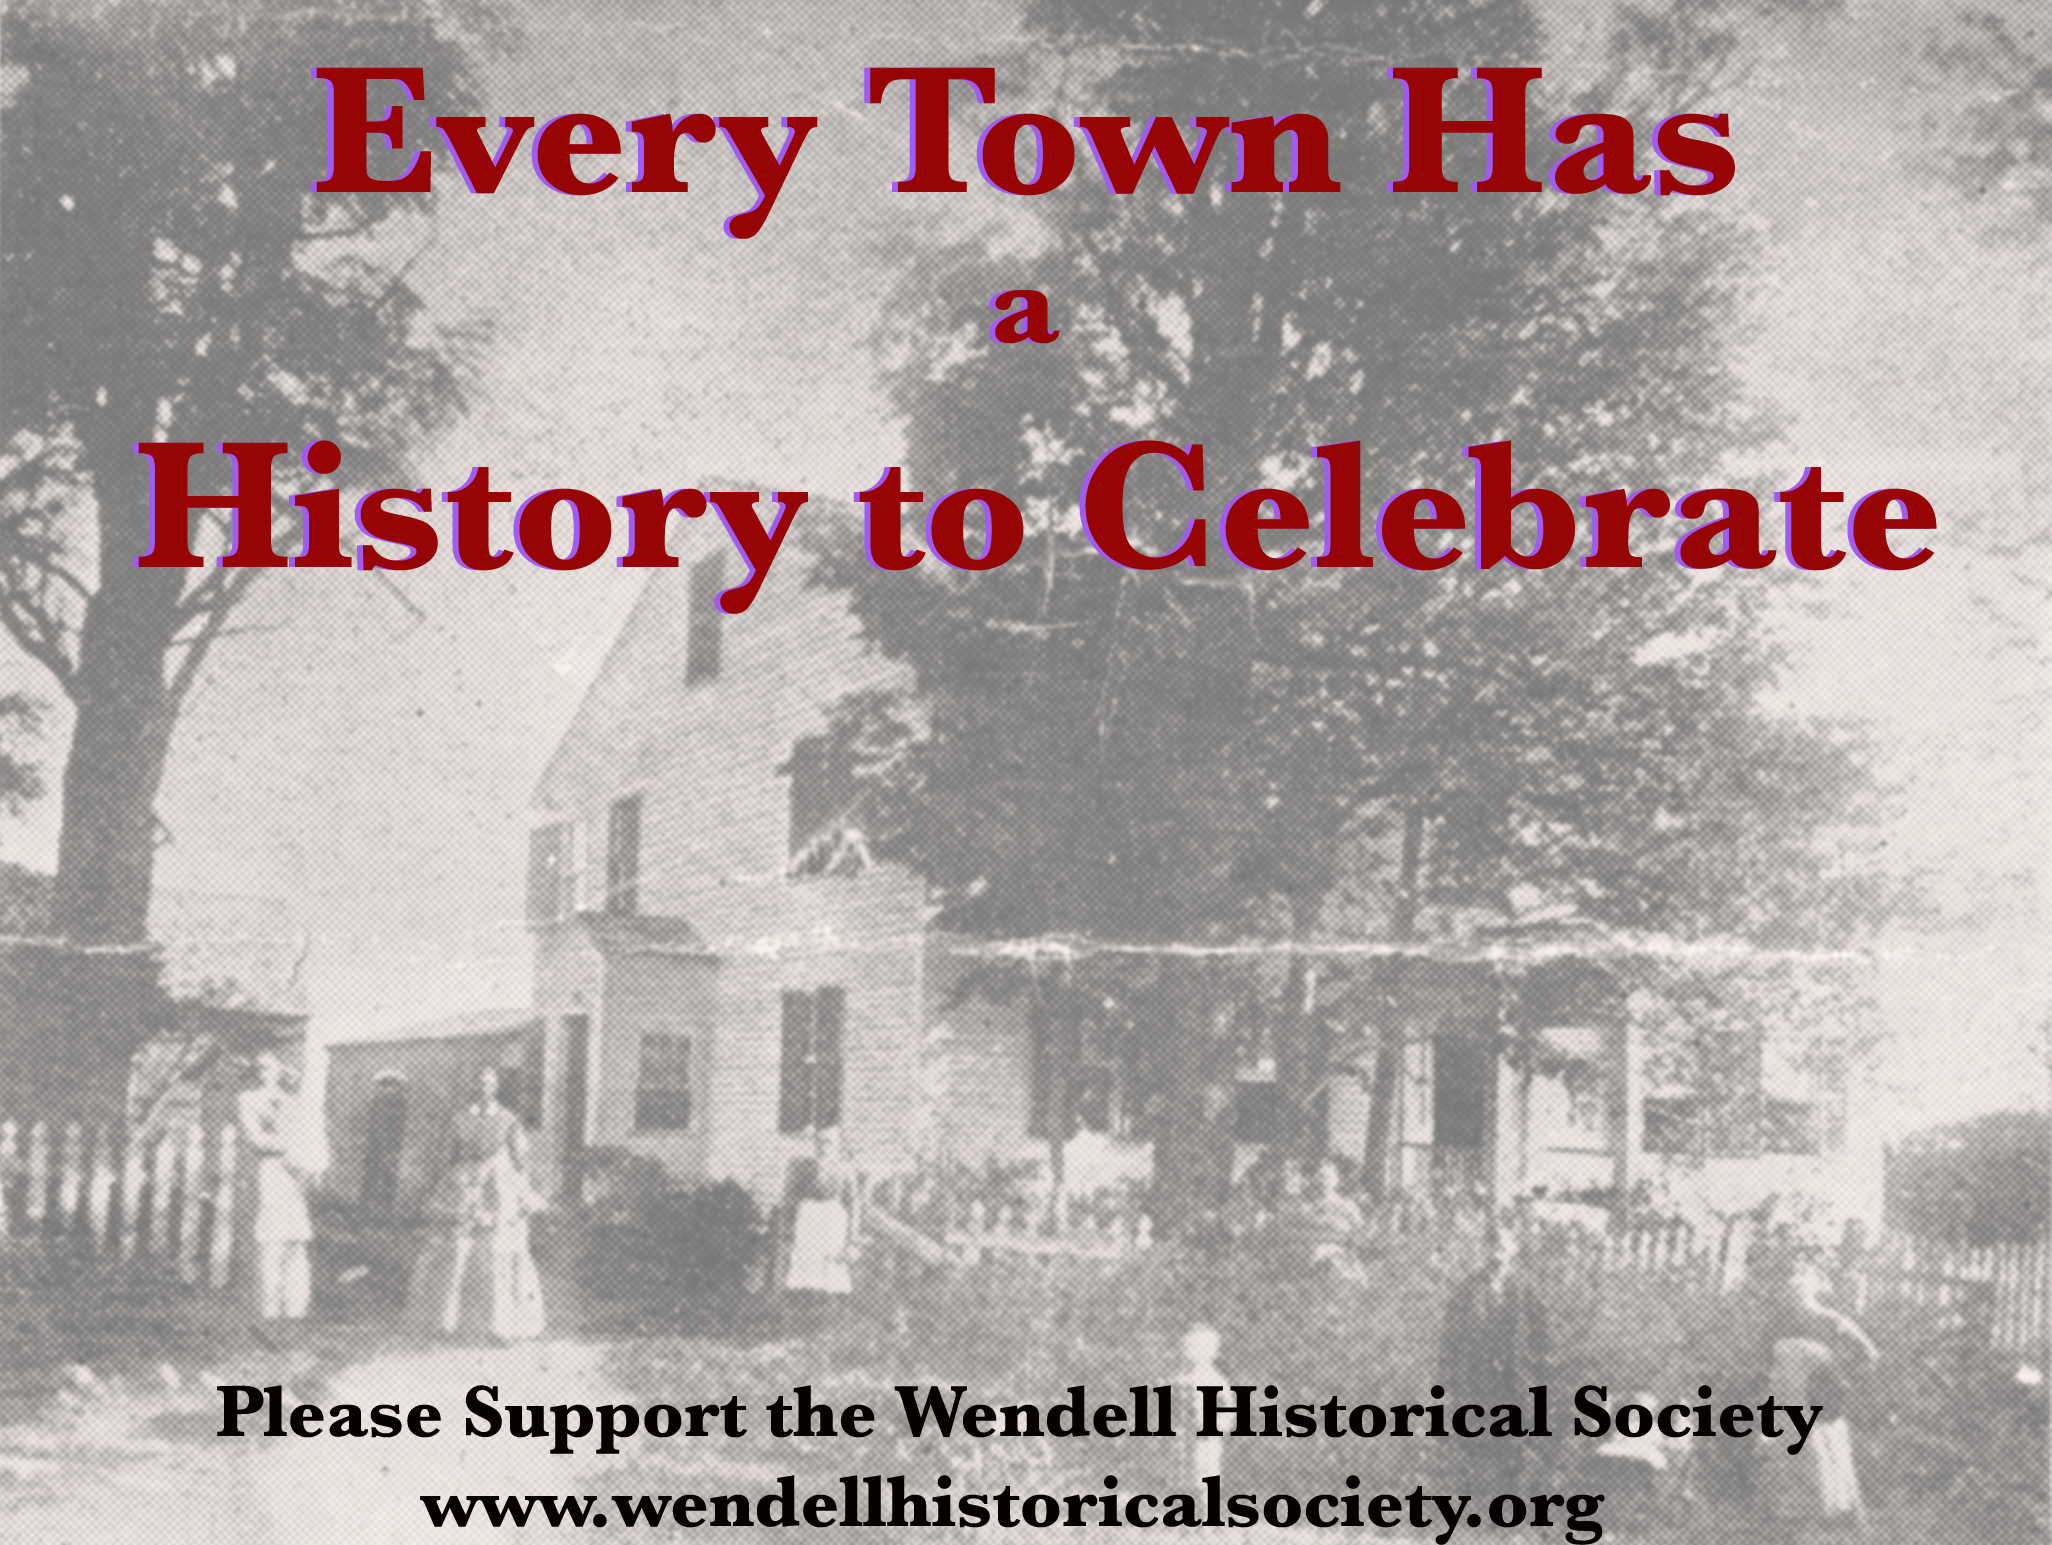 Every town has a history to celebrate!